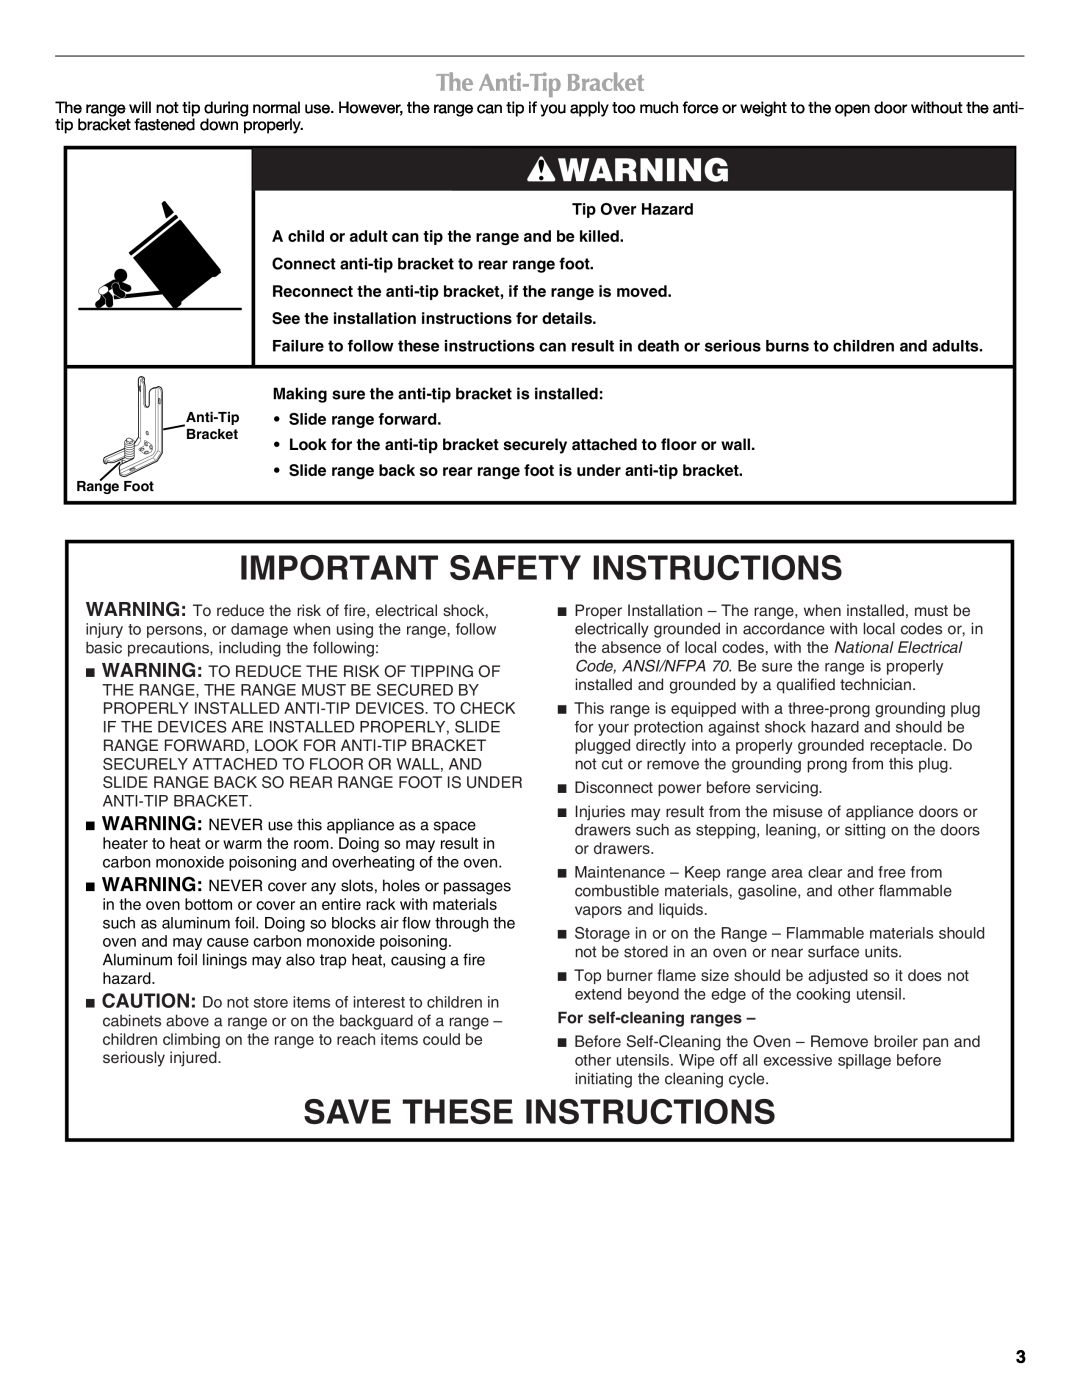 Maytag W10239464A warranty The Anti-TipBracket, Important Safety Instructions, Save These Instructions 